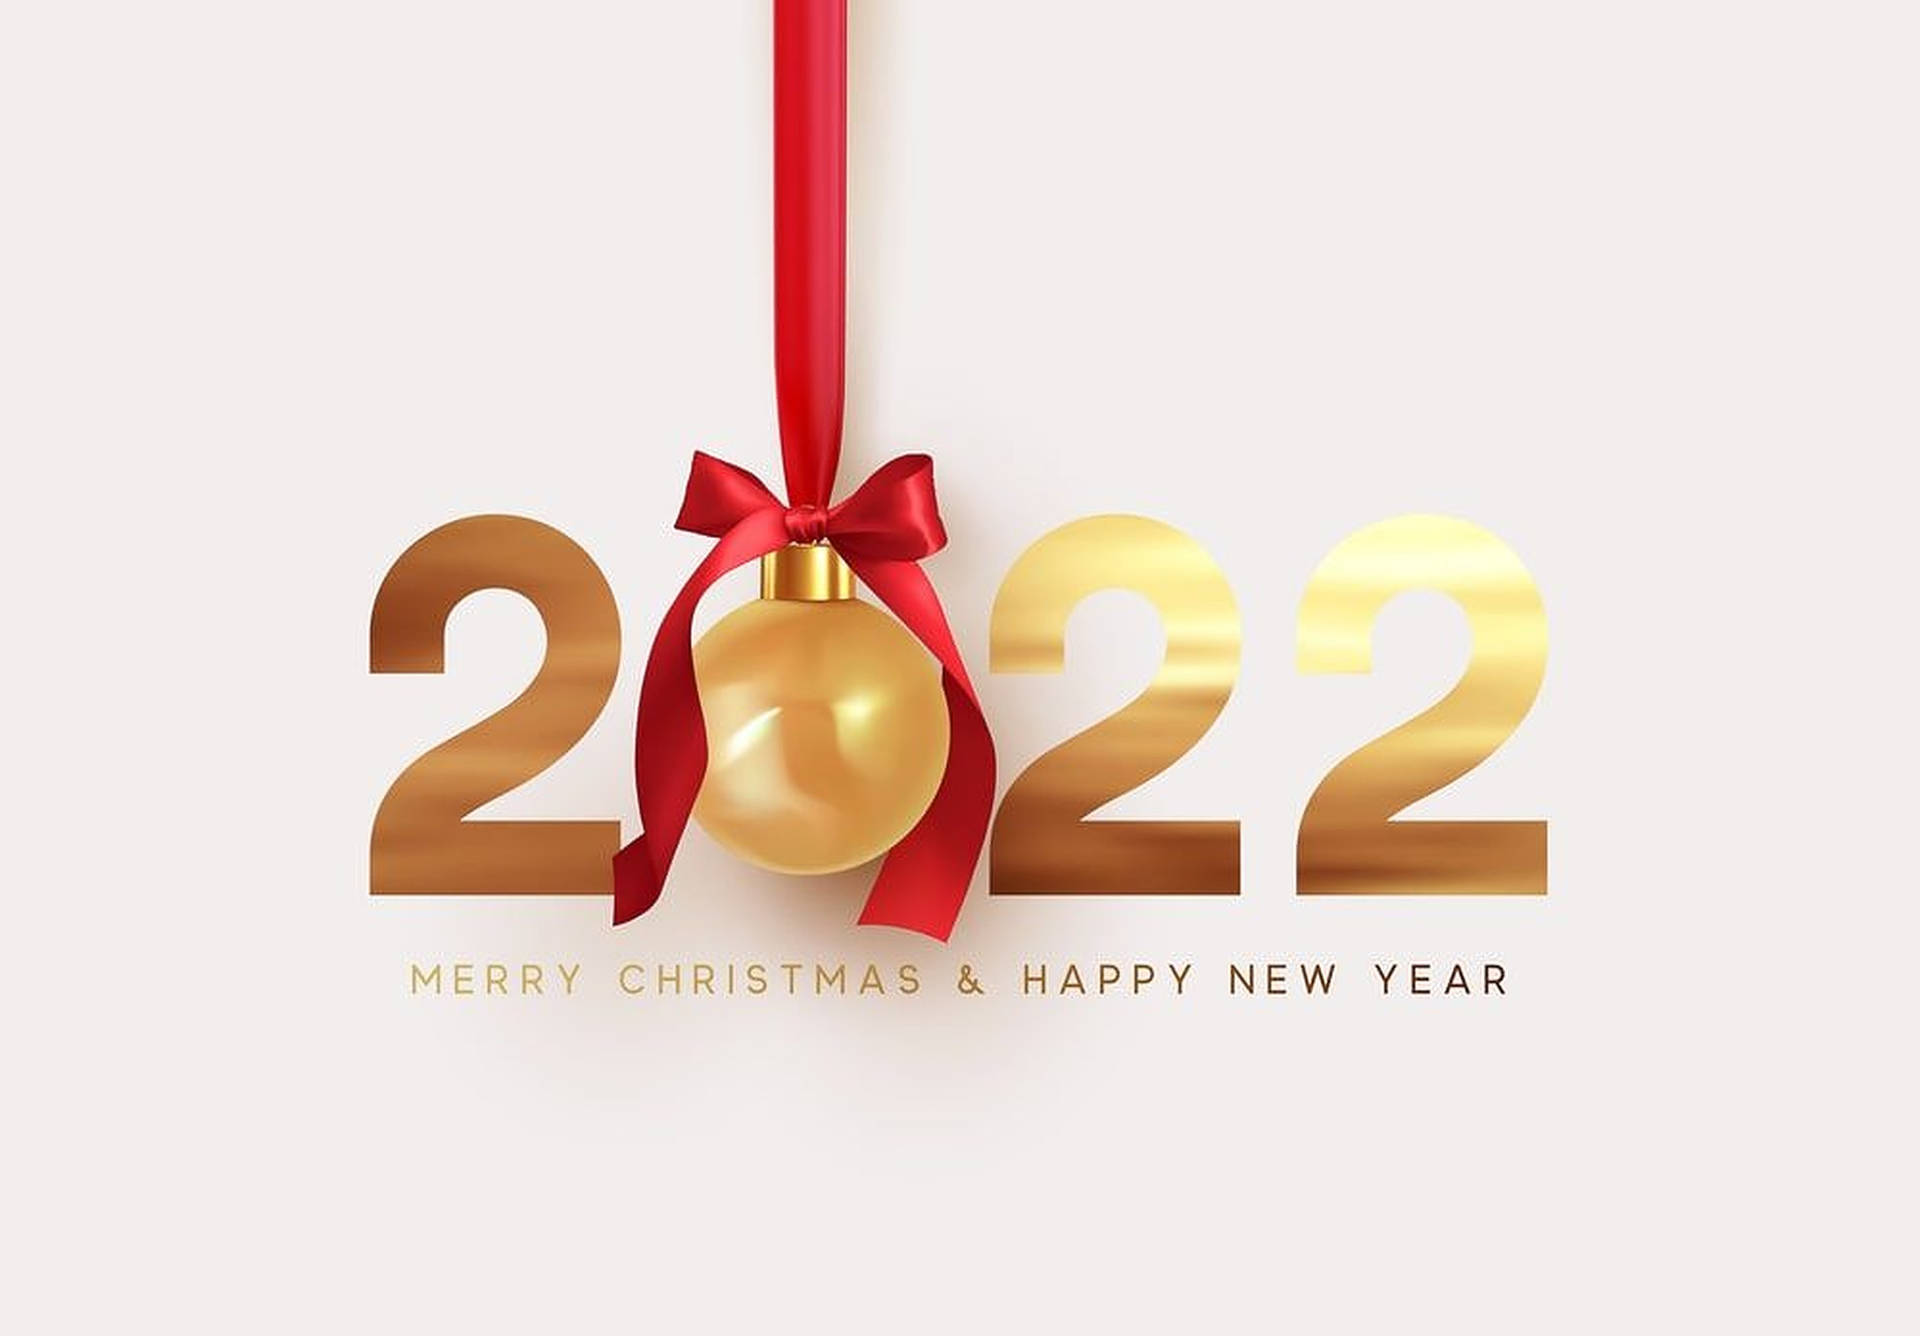 Merry Christmas And Happy New Year 2022 Wallpaper